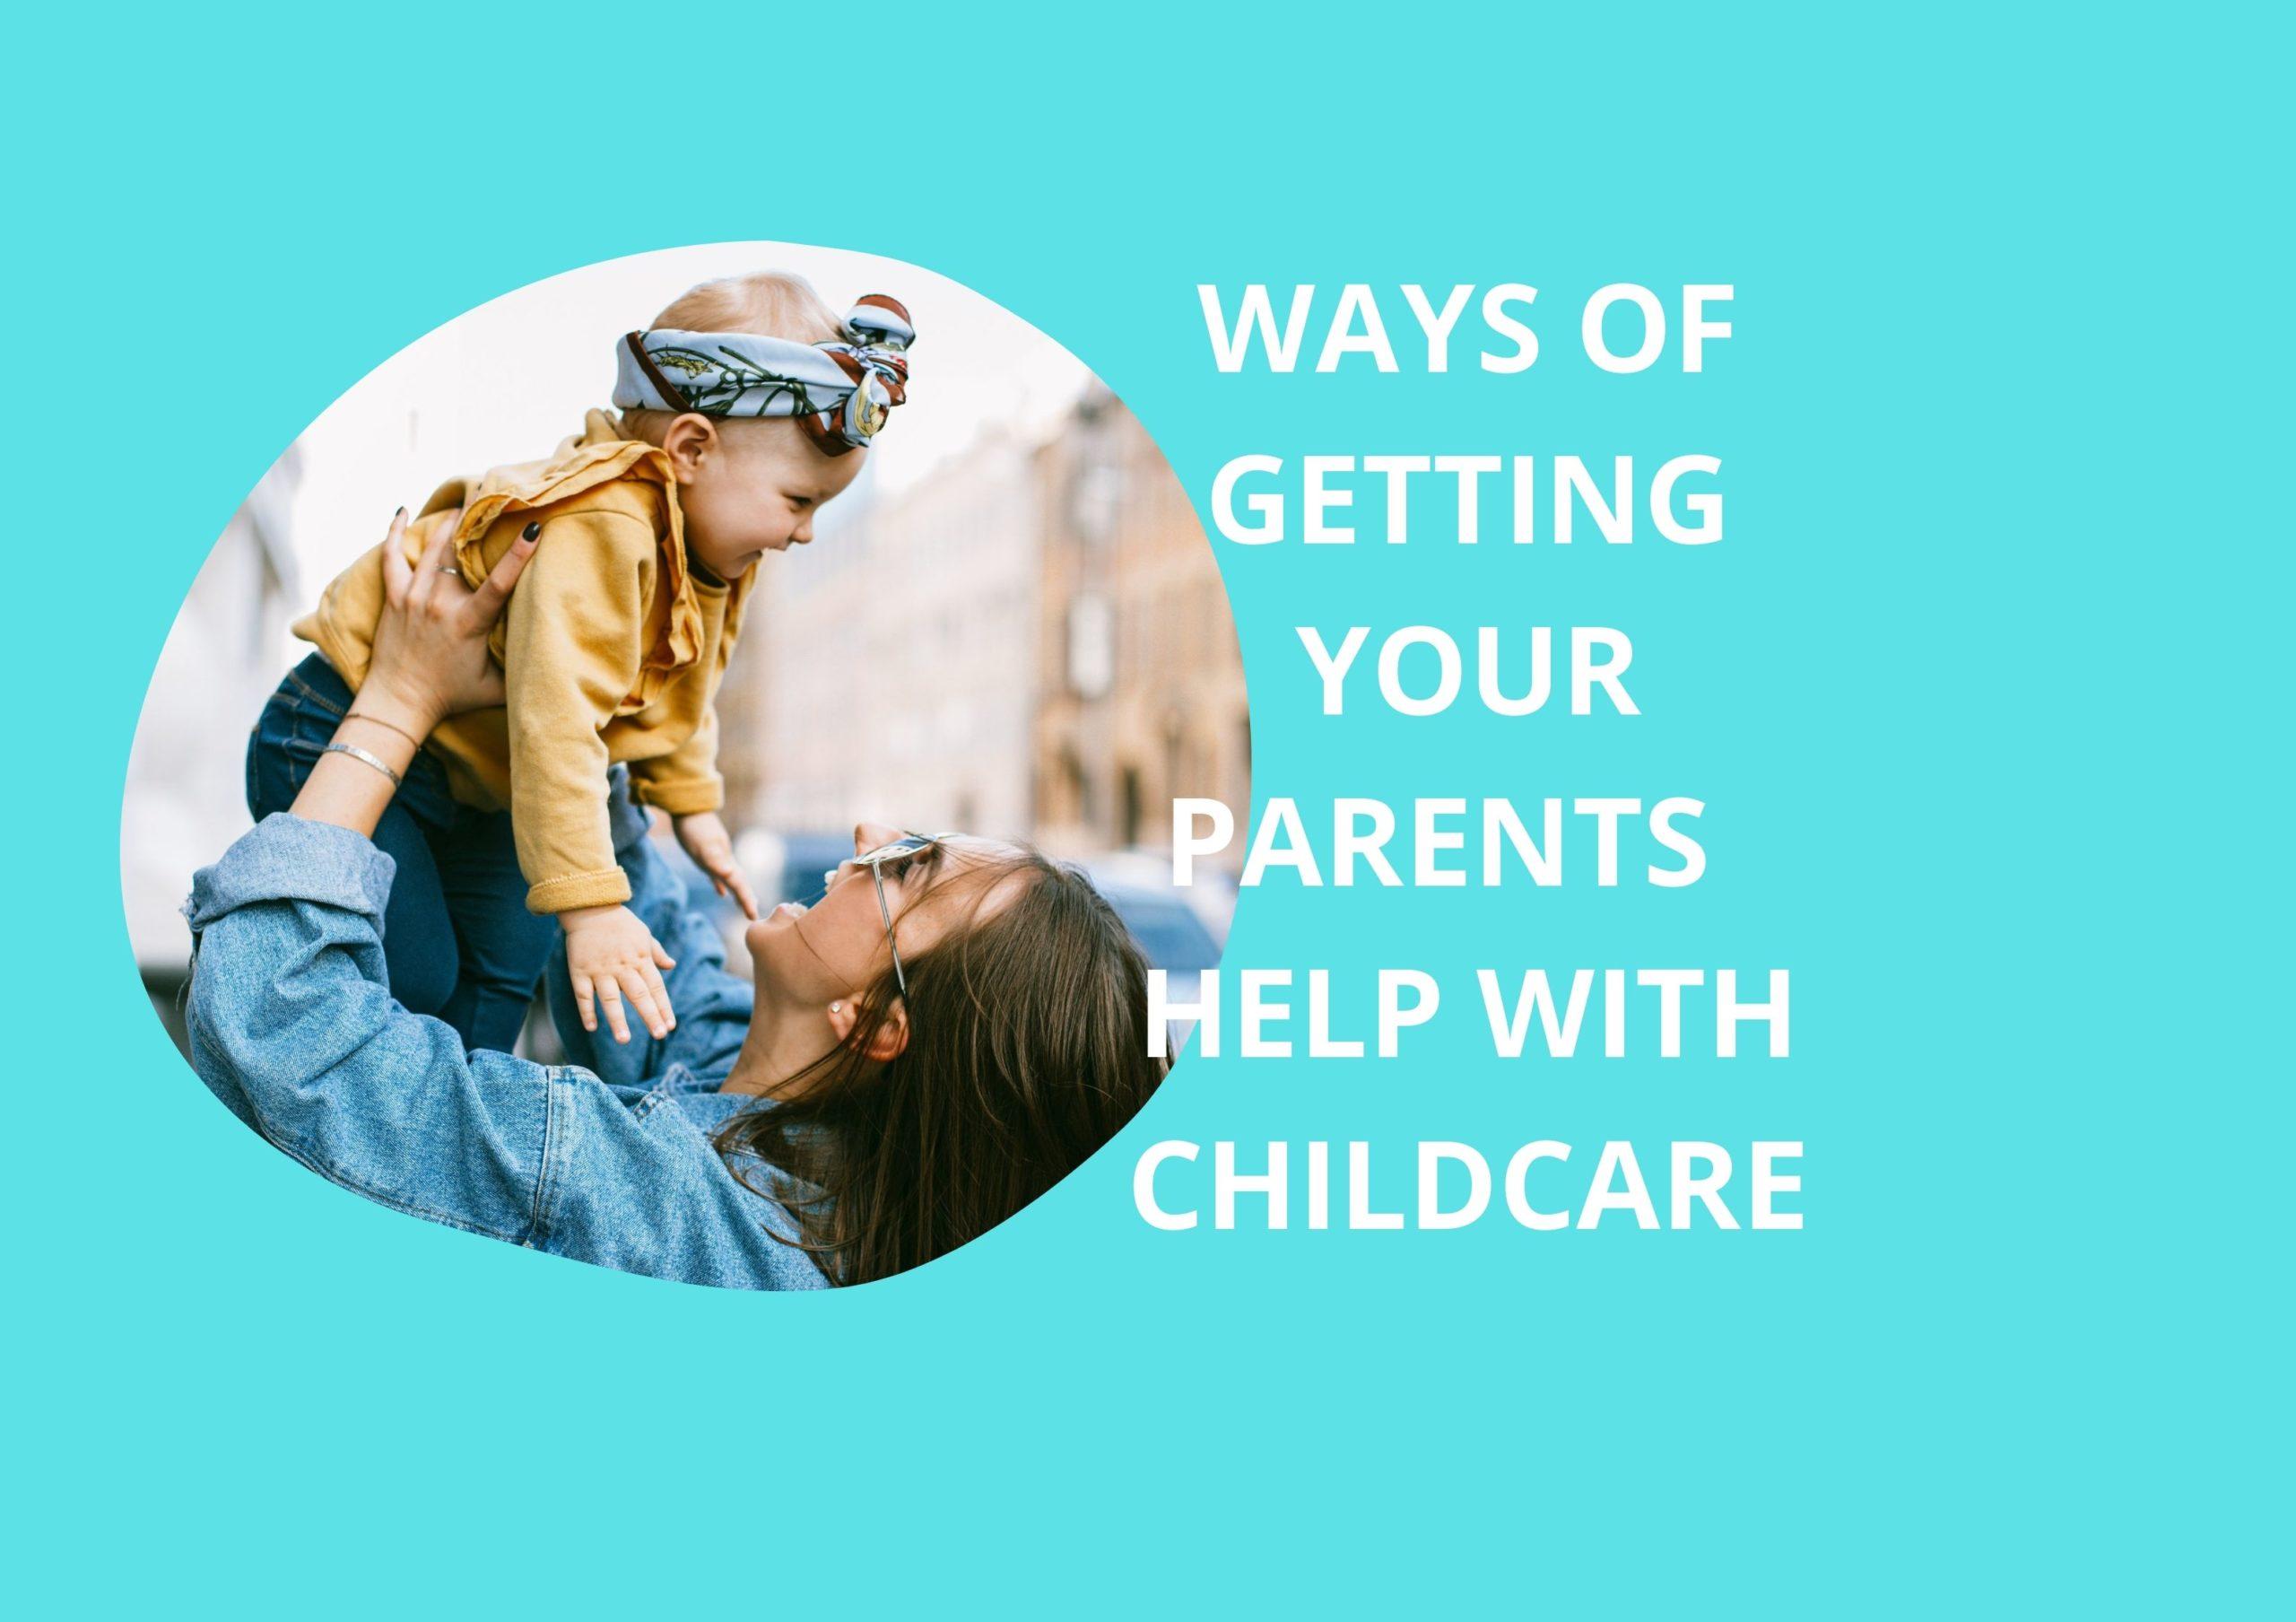 Simple Expert Secrets & Tips to Get Parents /Family Help with Childcare